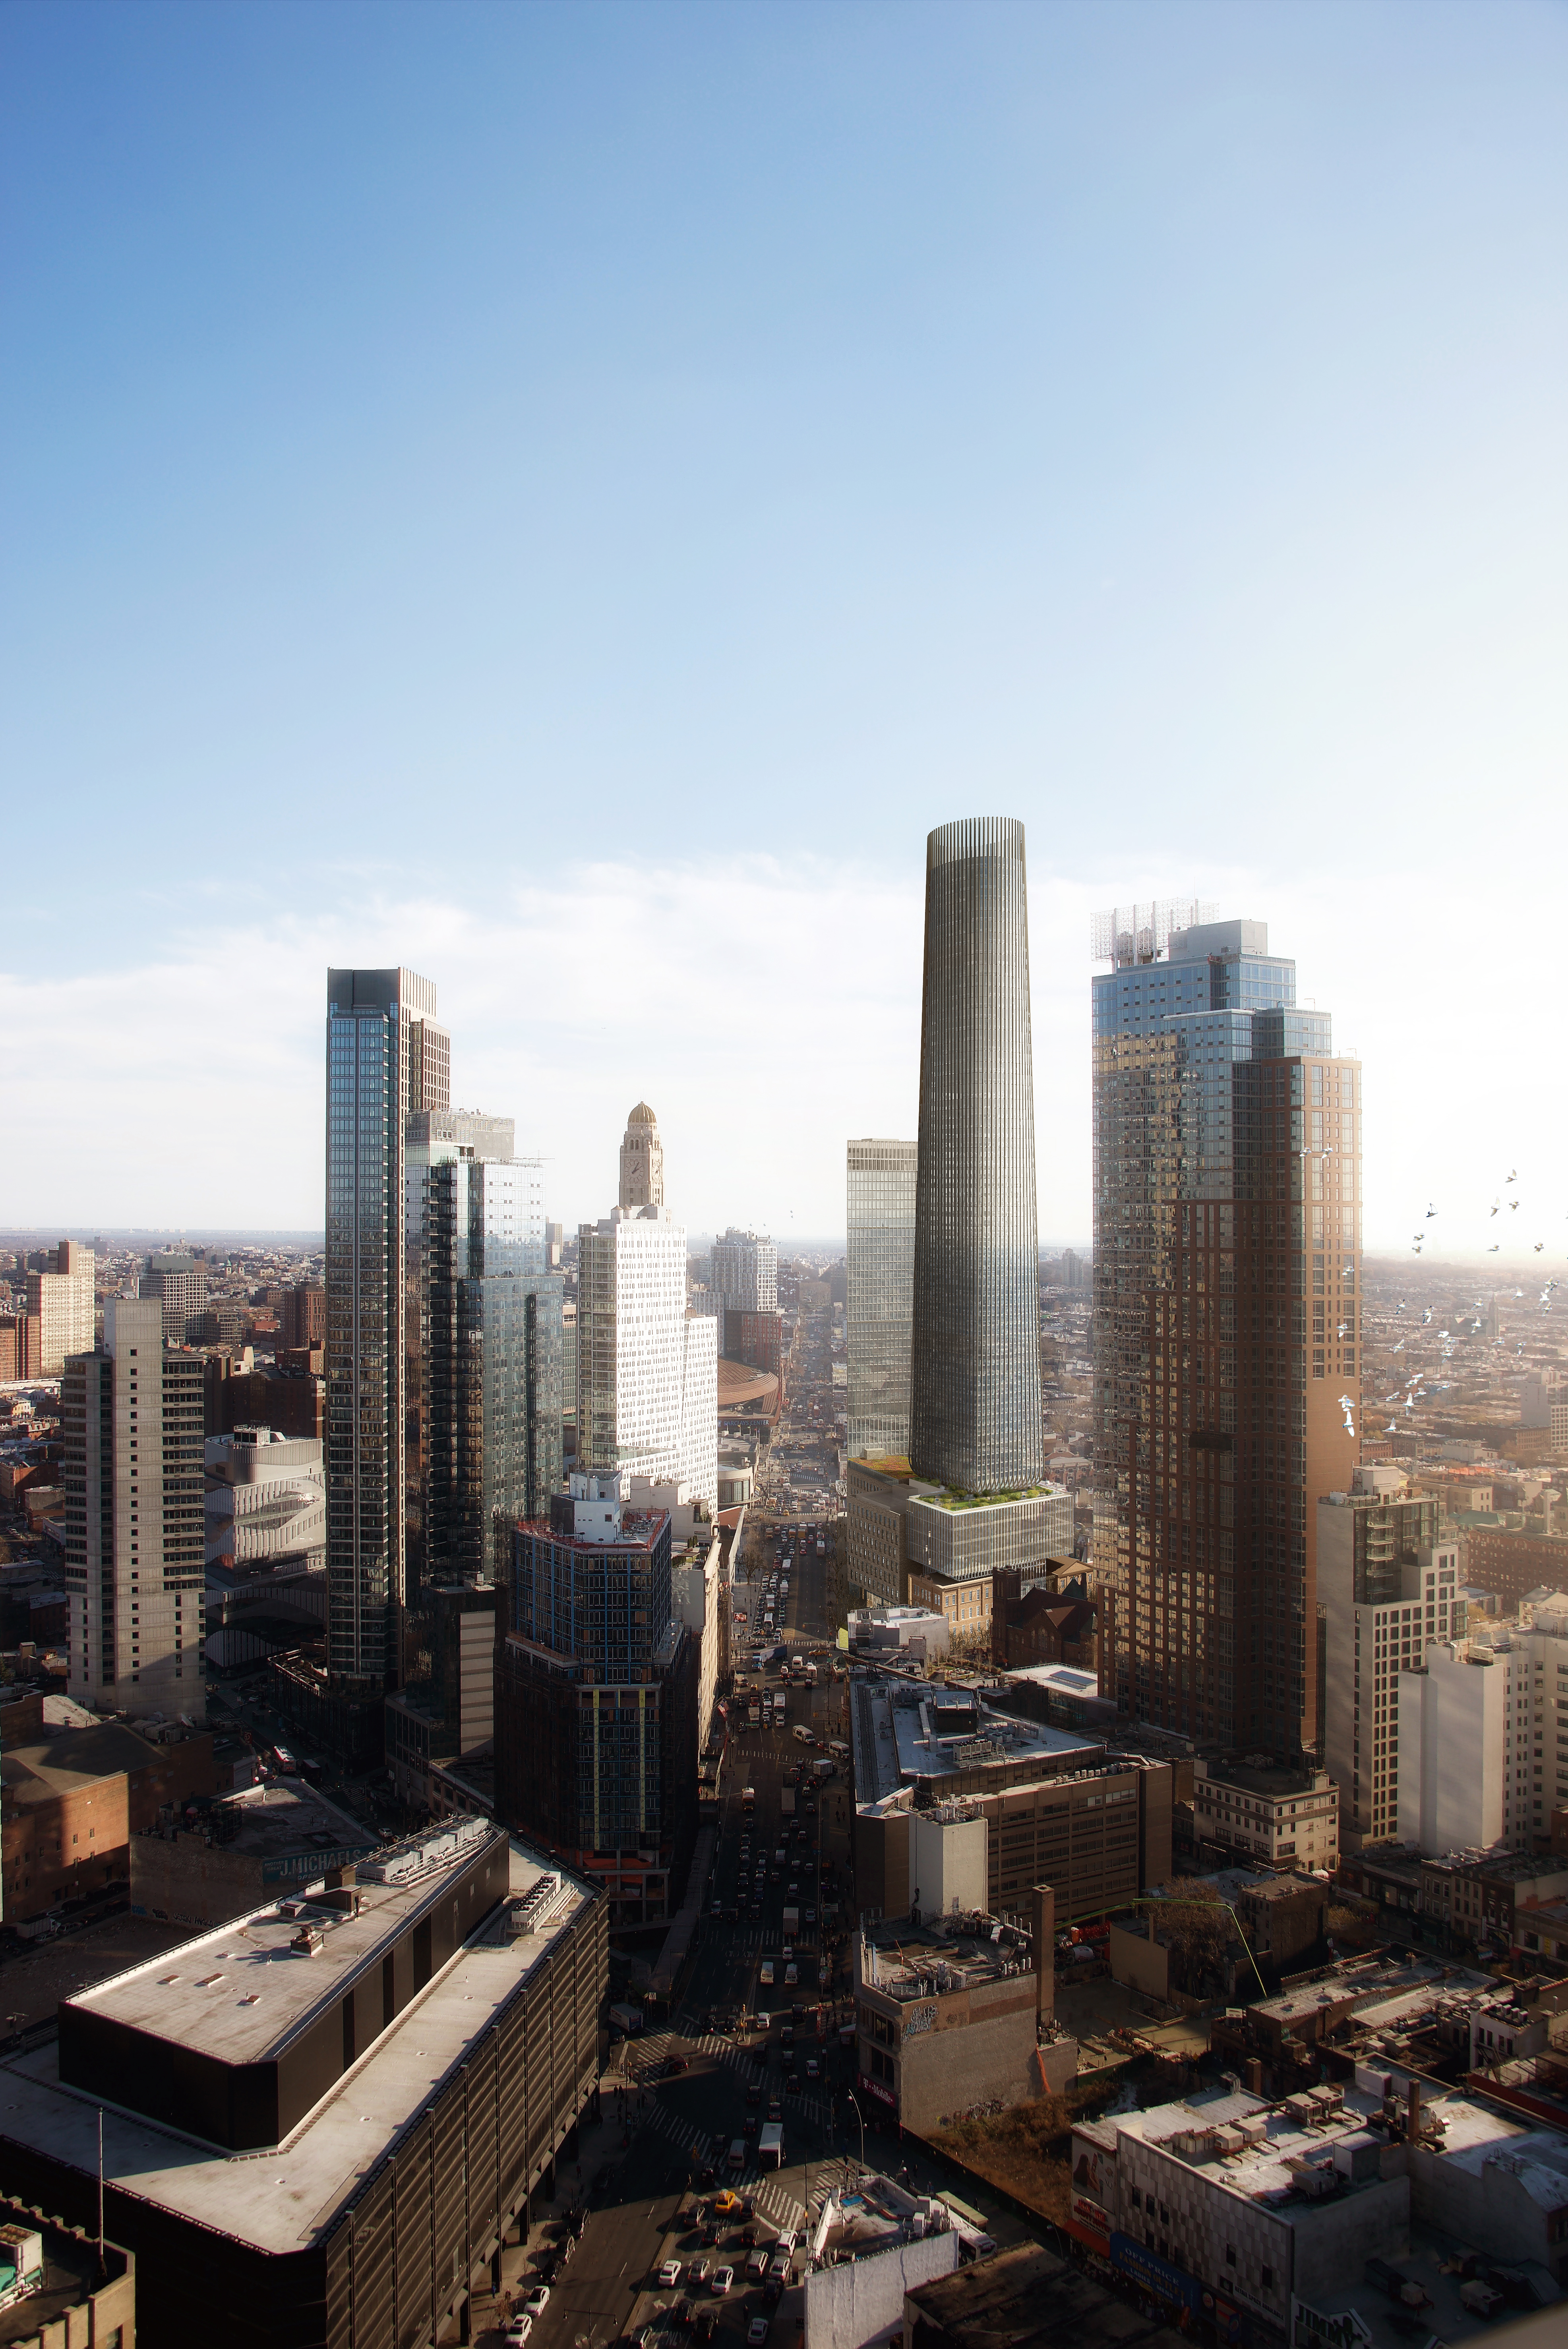 The skyscraper across from the Williamsburgh Savings Bank Clocktower is 80 Flatbush Ave. Rendering by Alloy Development/Luxigon